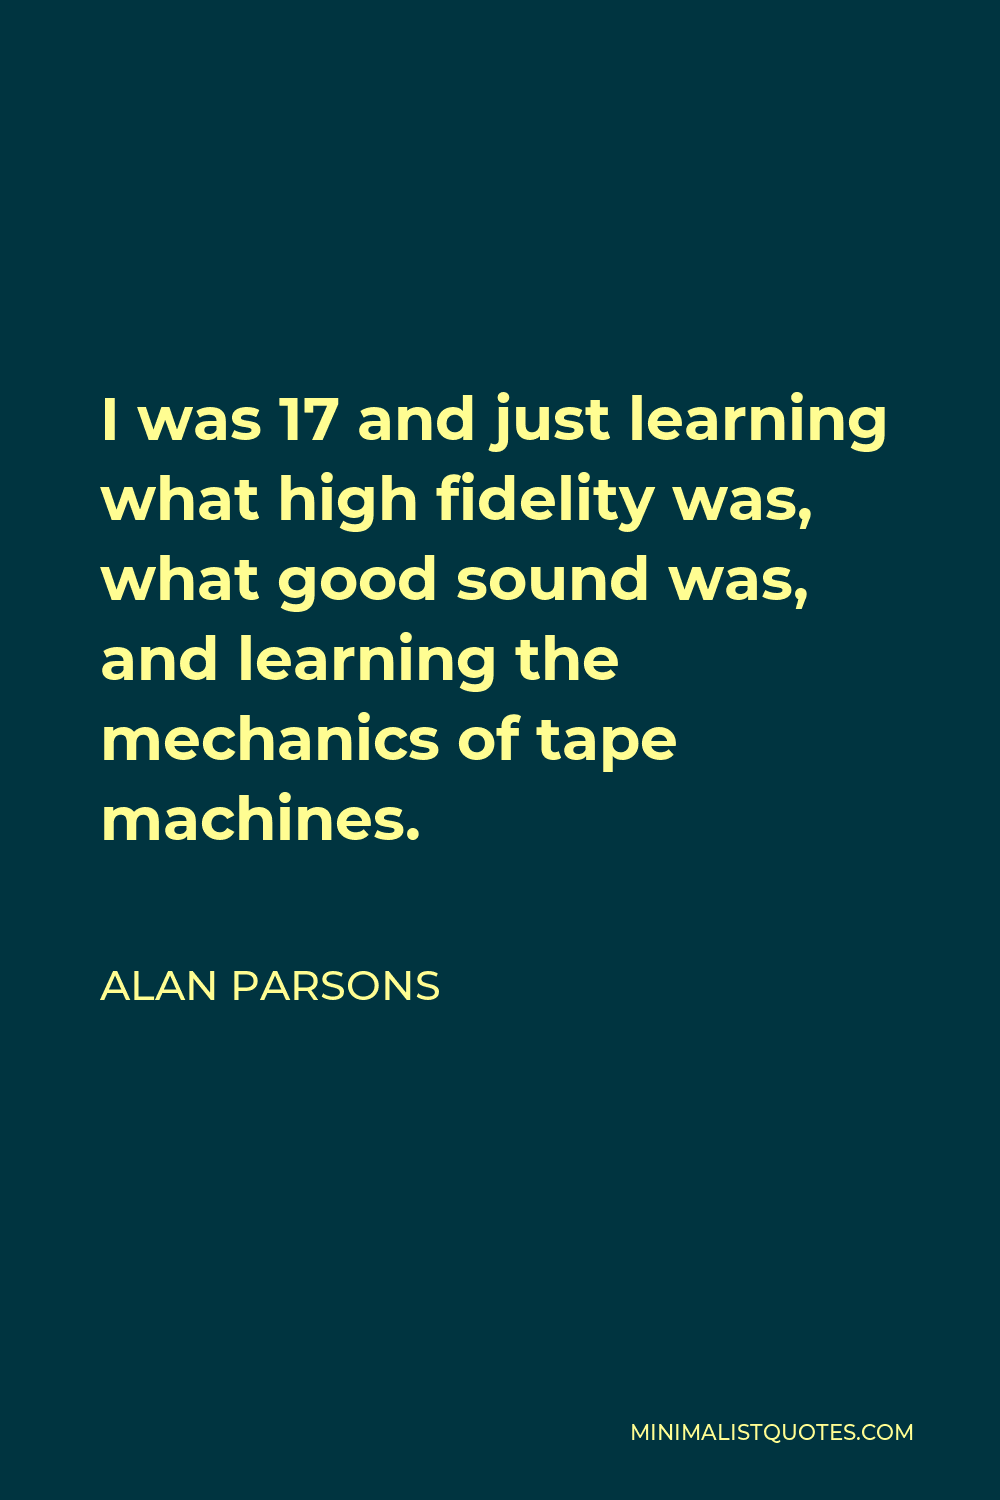 Alan Parsons Quote - I was 17 and just learning what high fidelity was, what good sound was, and learning the mechanics of tape machines.